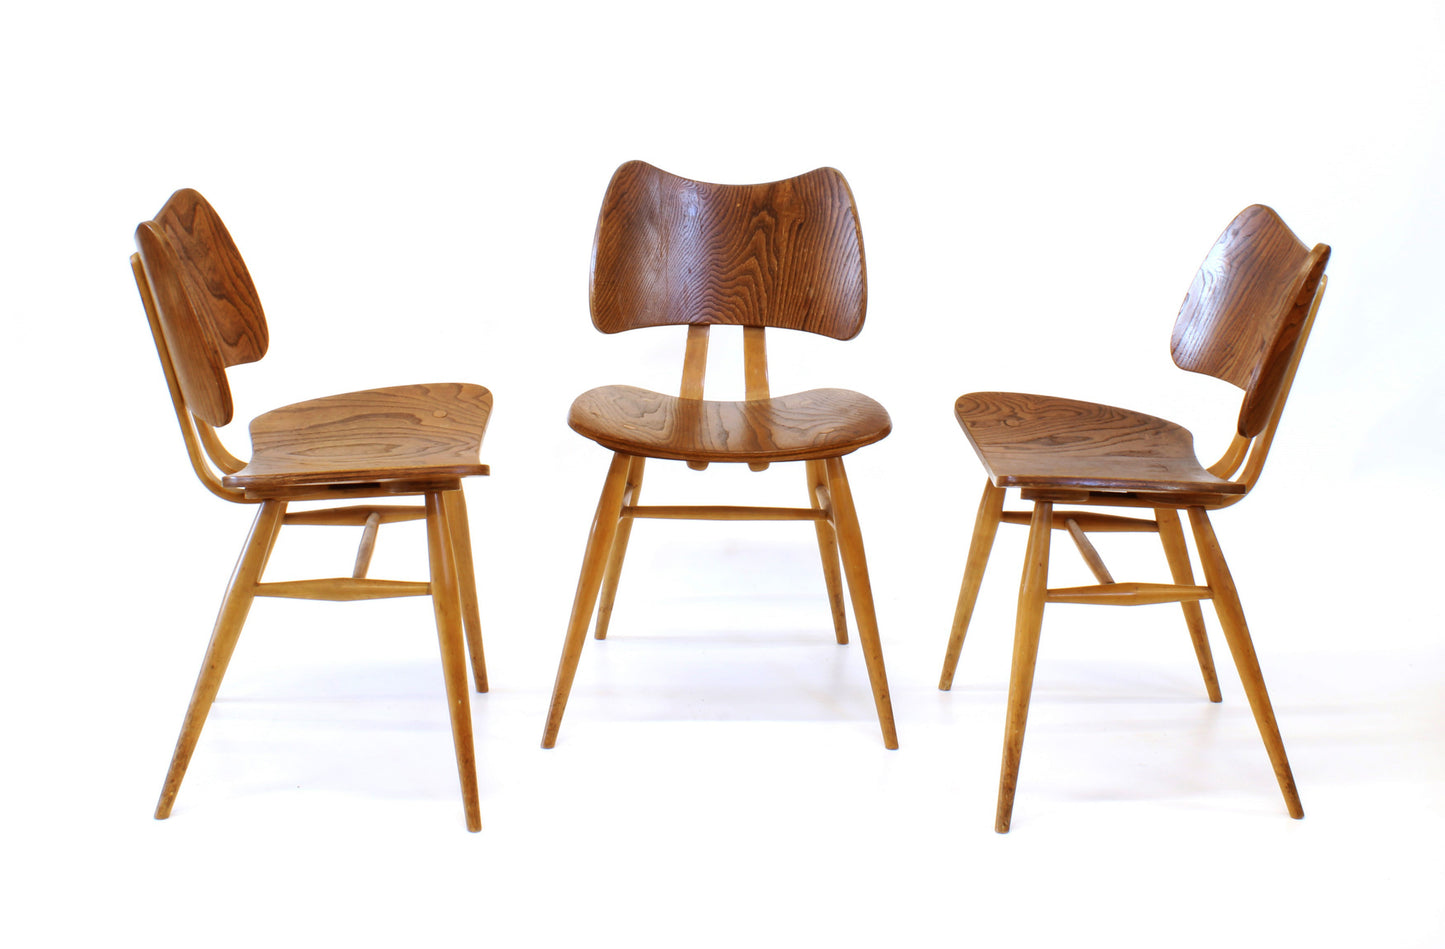 Original 1960s Ercol Model 401 Butterfly Chairs. TWO SOLD ONLY ONE REMAINING